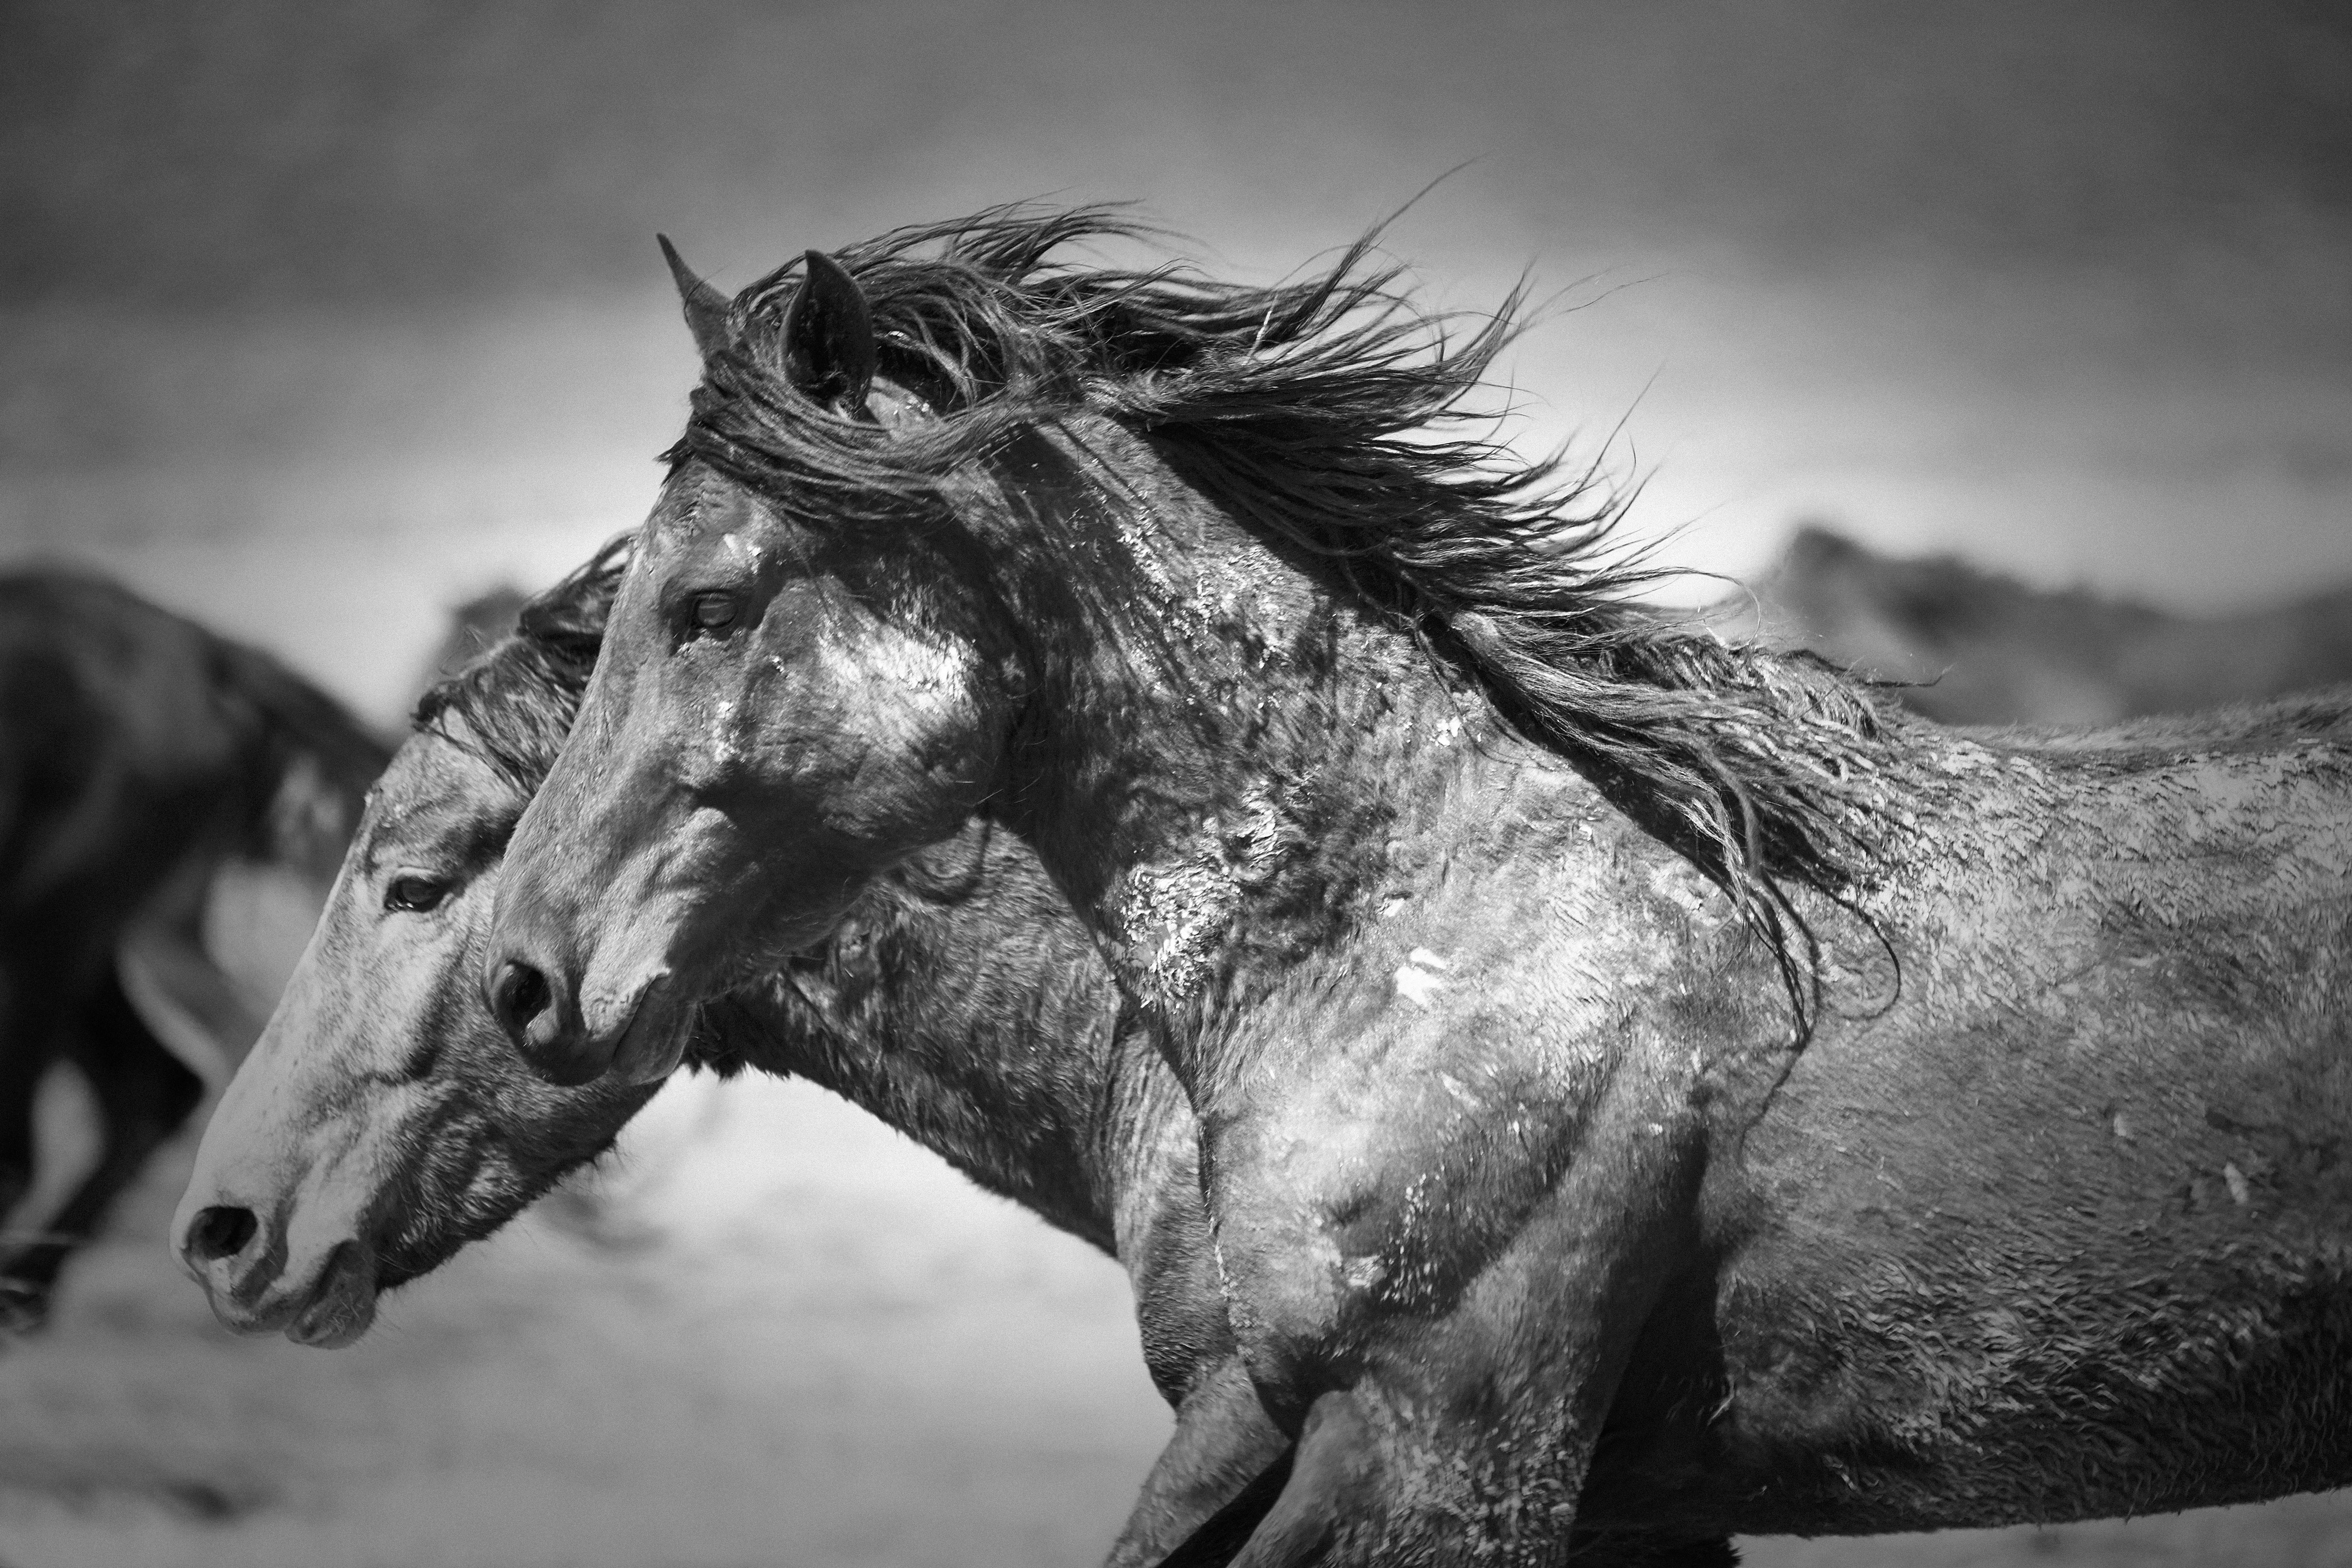 Shane Russeck Black and White Photograph - Statuesque 24x36 Photography of Wild Horses Mustangs Photograph Fine Art Print